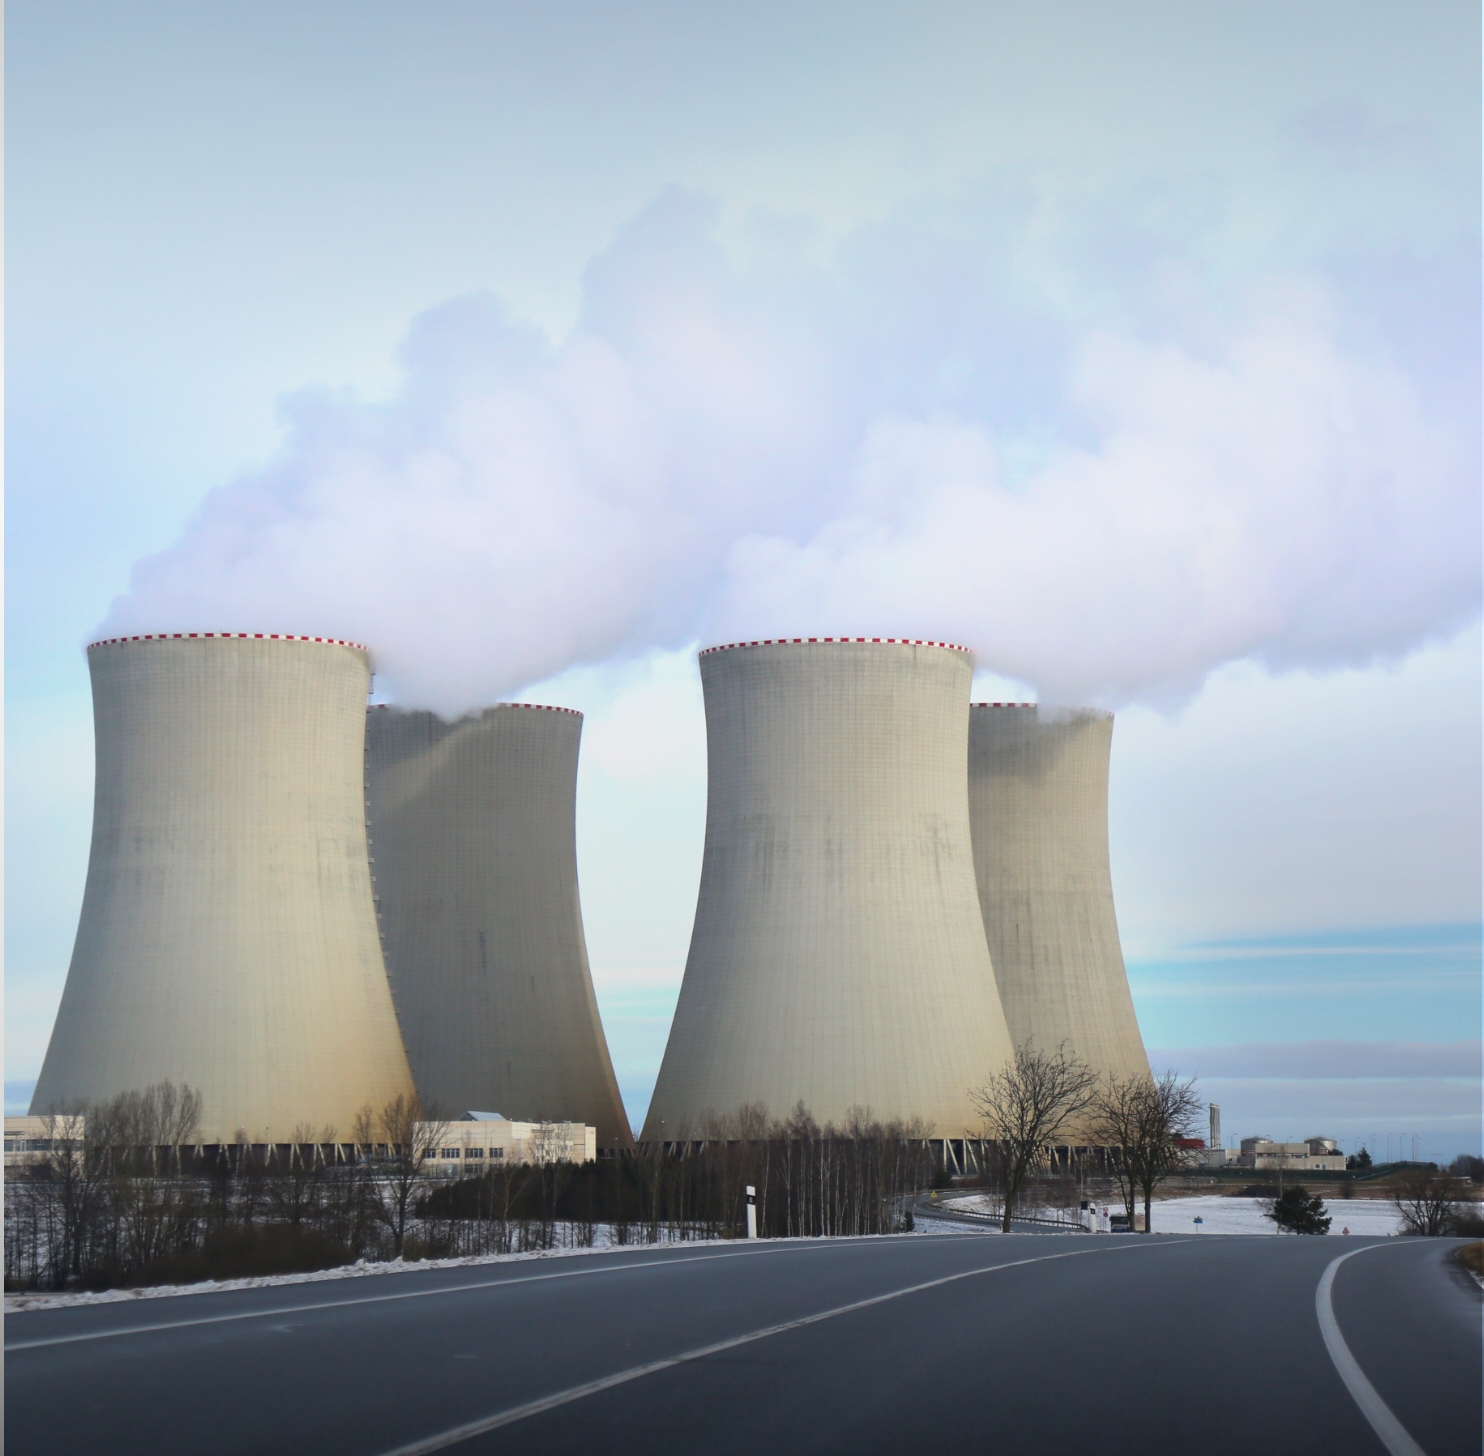 Image of four cooling towers of a power plant.